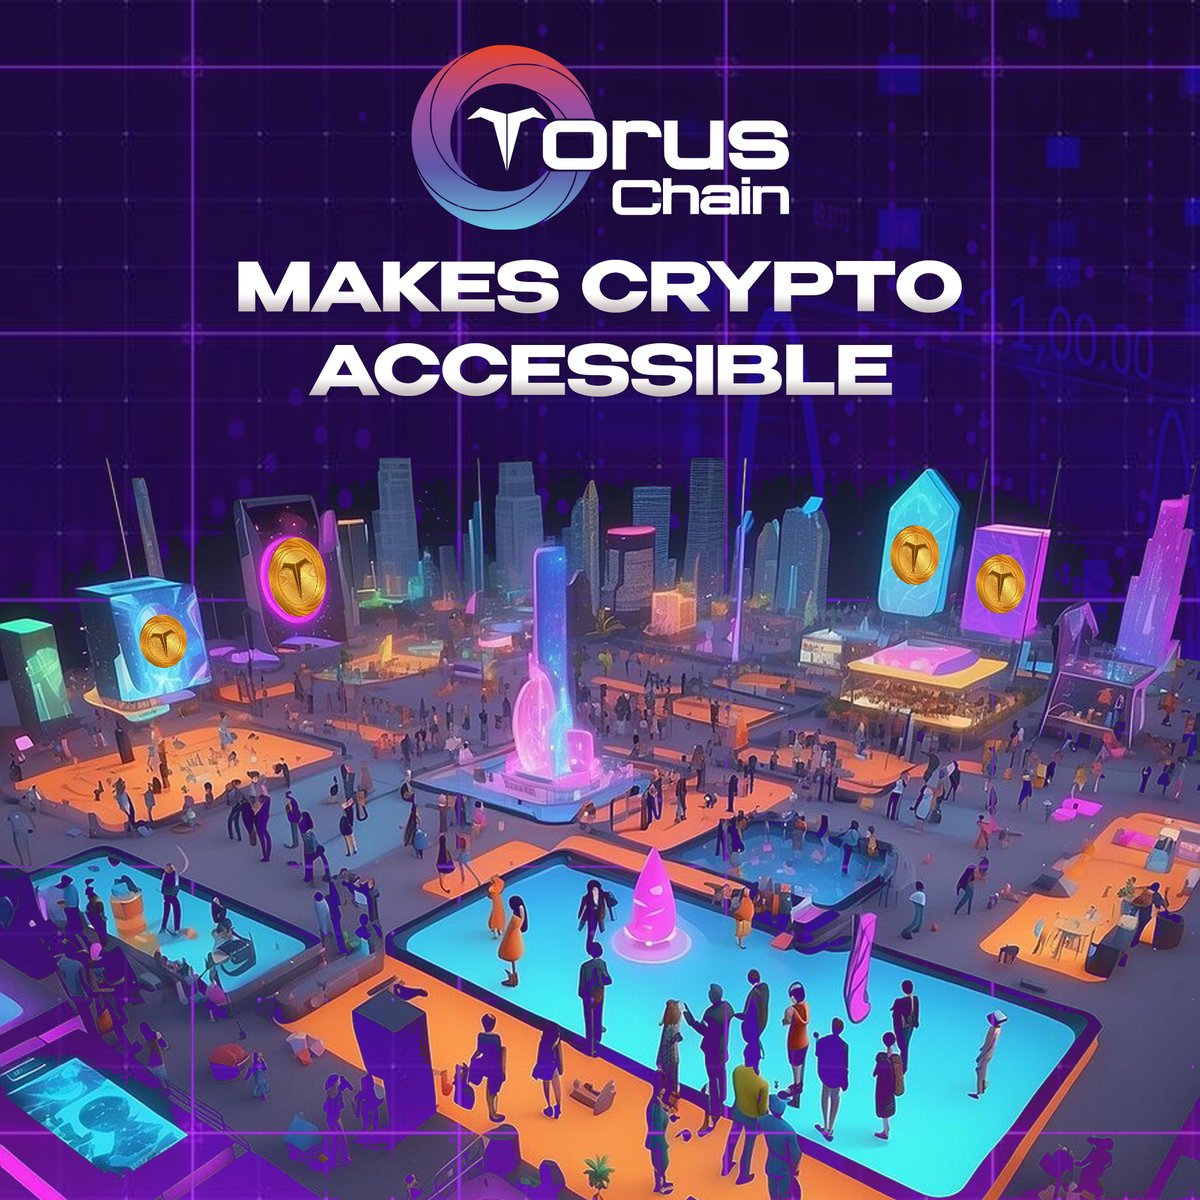 Unlock the world of crypto with Torus! 🌐

💫 Experience seamless accessibility and user-friendly features that are breaking barriers and making crypto mainstream. 

🚀 Join us now and embark on your crypto journey with ease! 

#Torus #Blockchain #Layer1 #Web3 #Crypto…